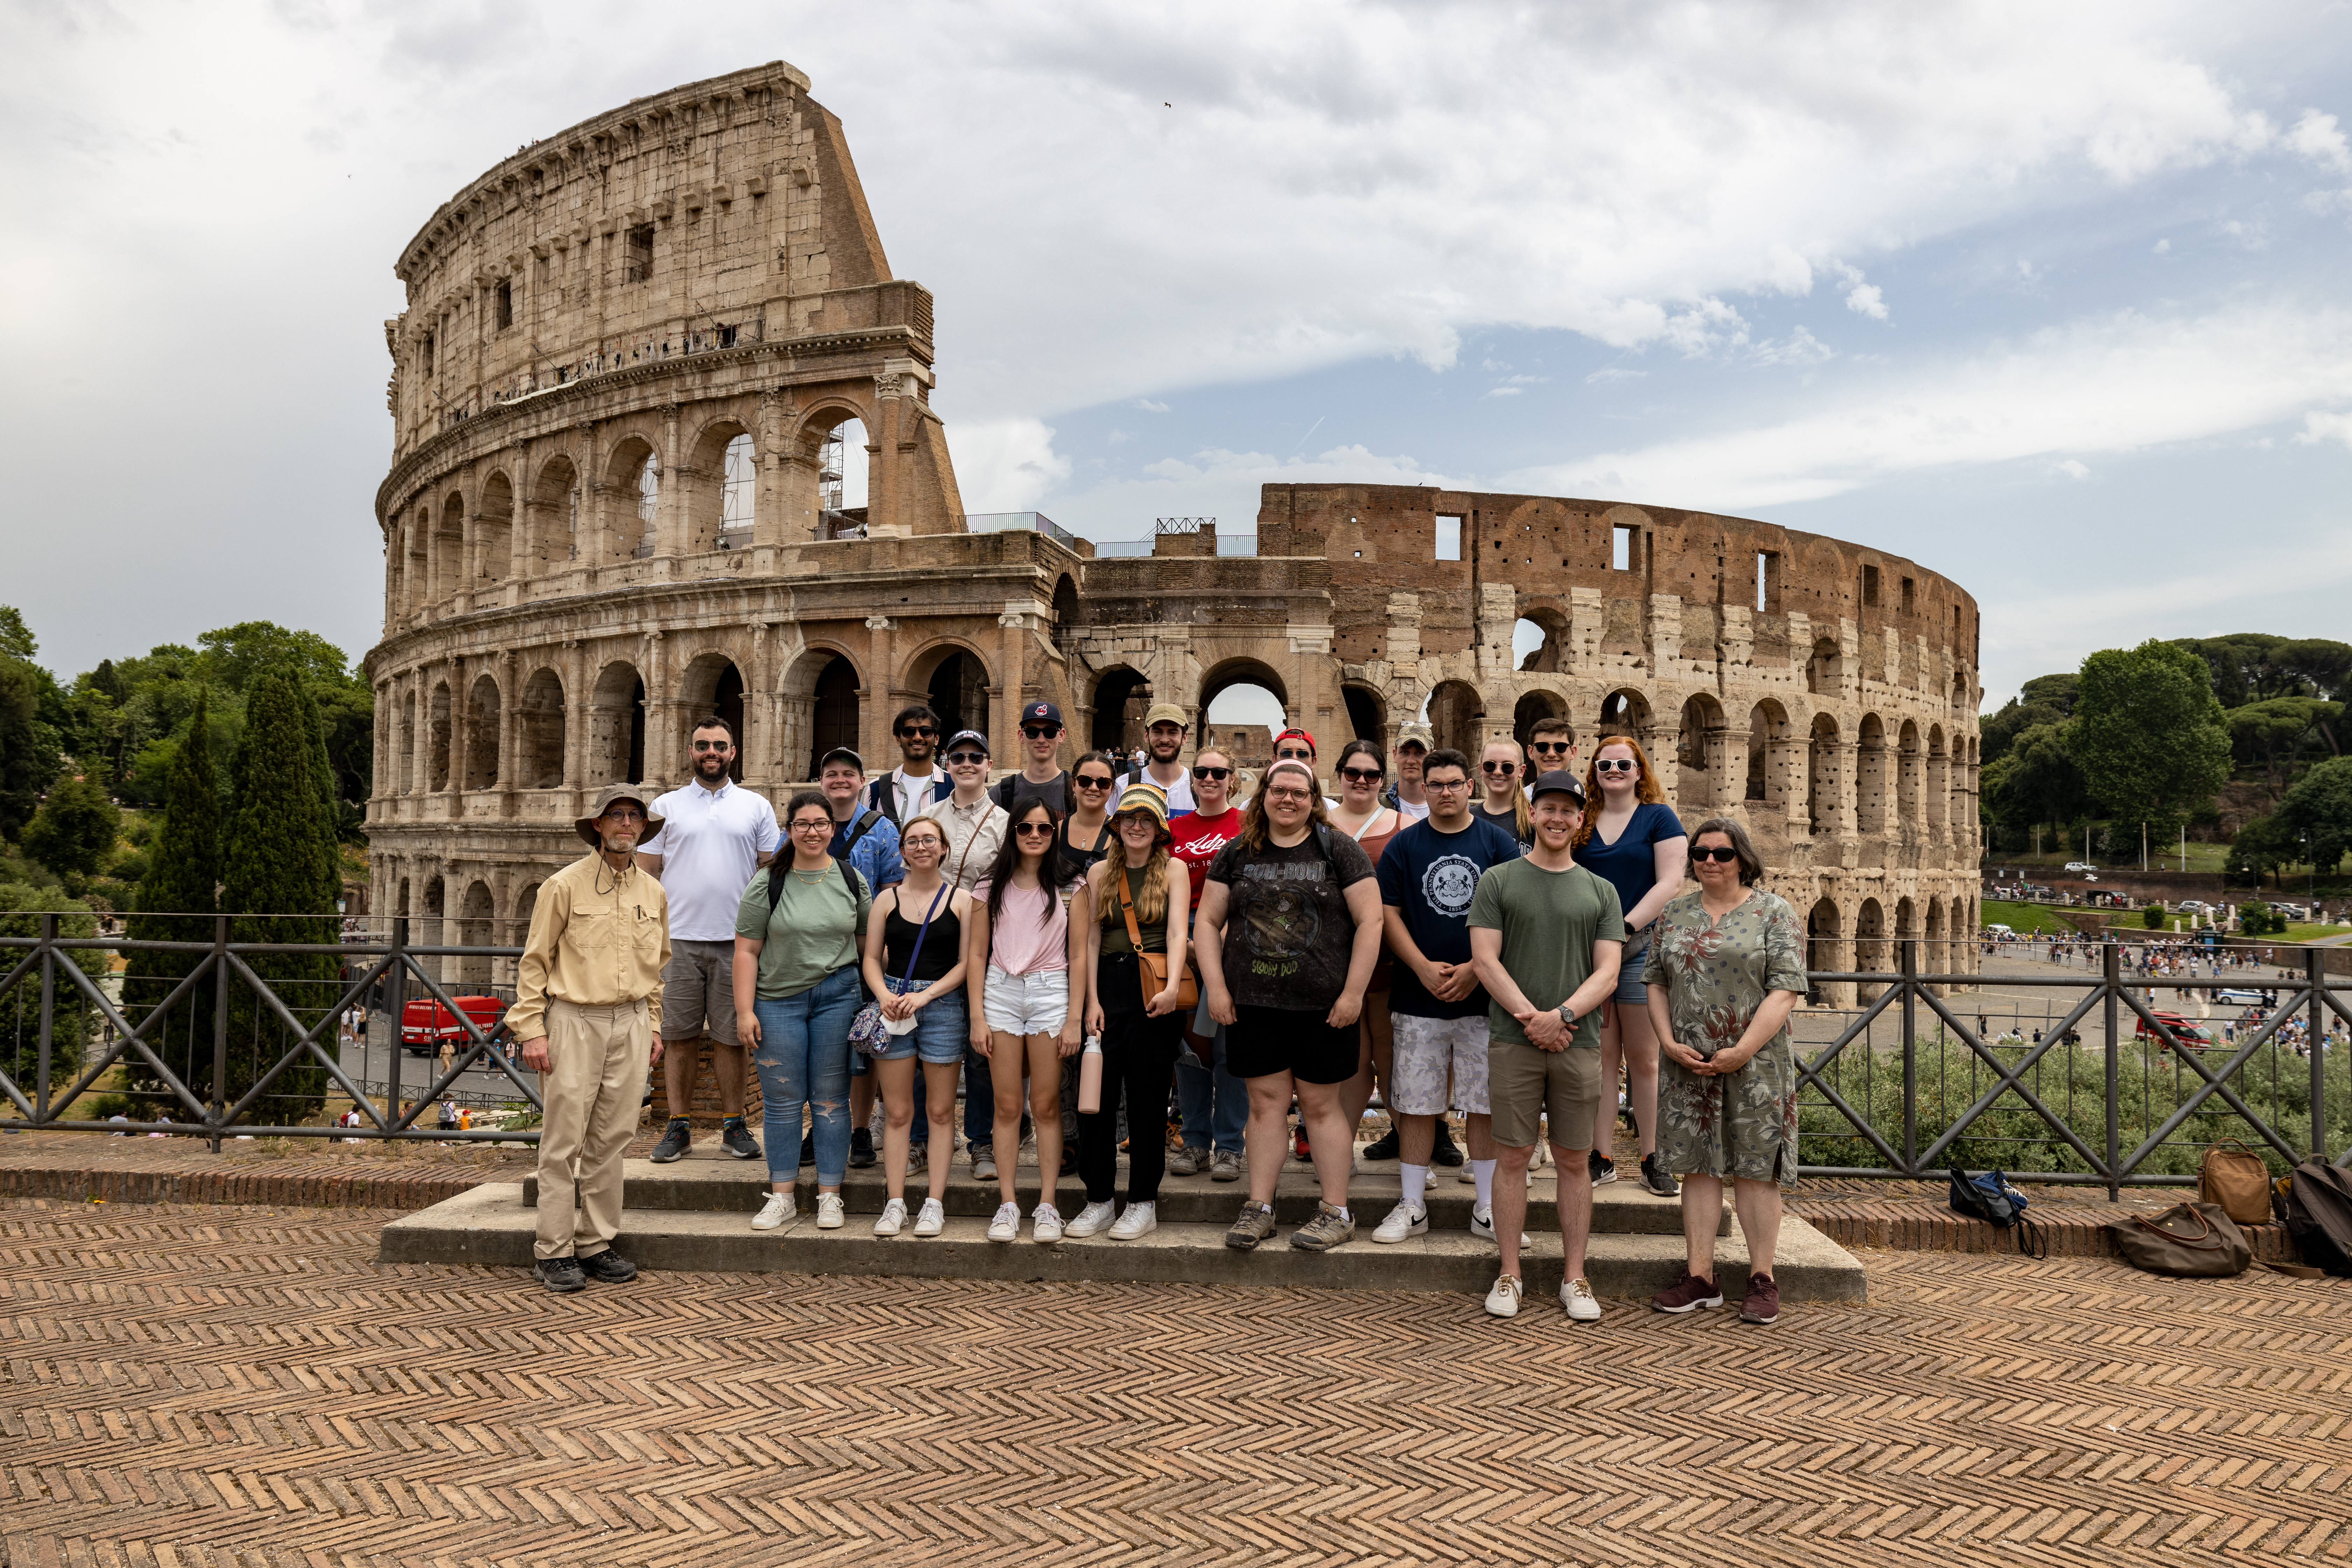 Students from the June 2022 Study Tour of Roman History and Archaeology pose in front of the Colosseum in Rome, Italy.